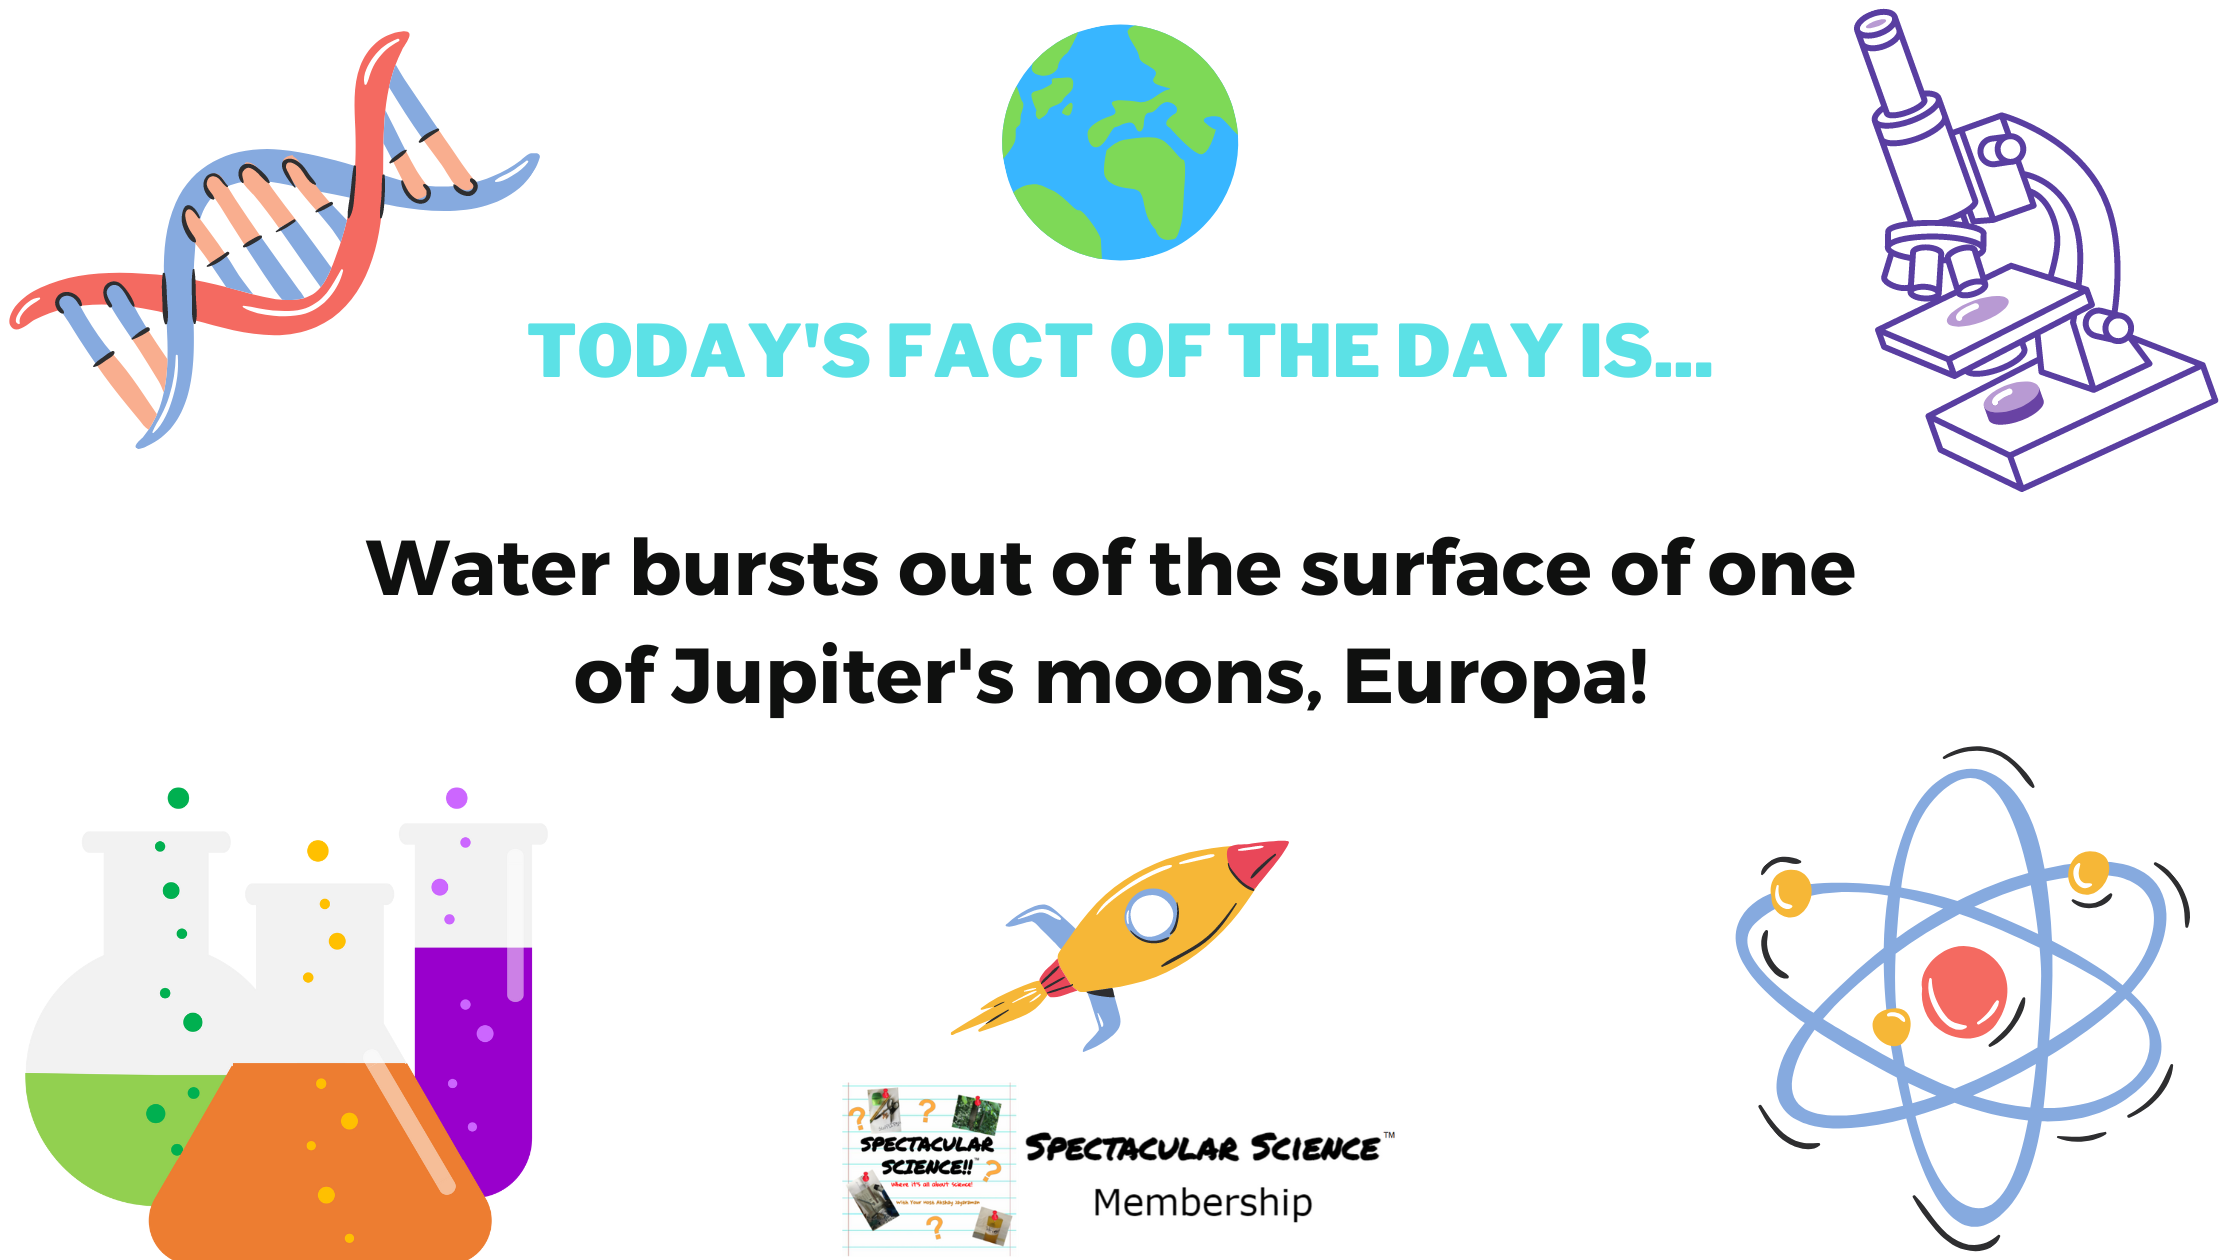 Fact of the Day Image June 27th